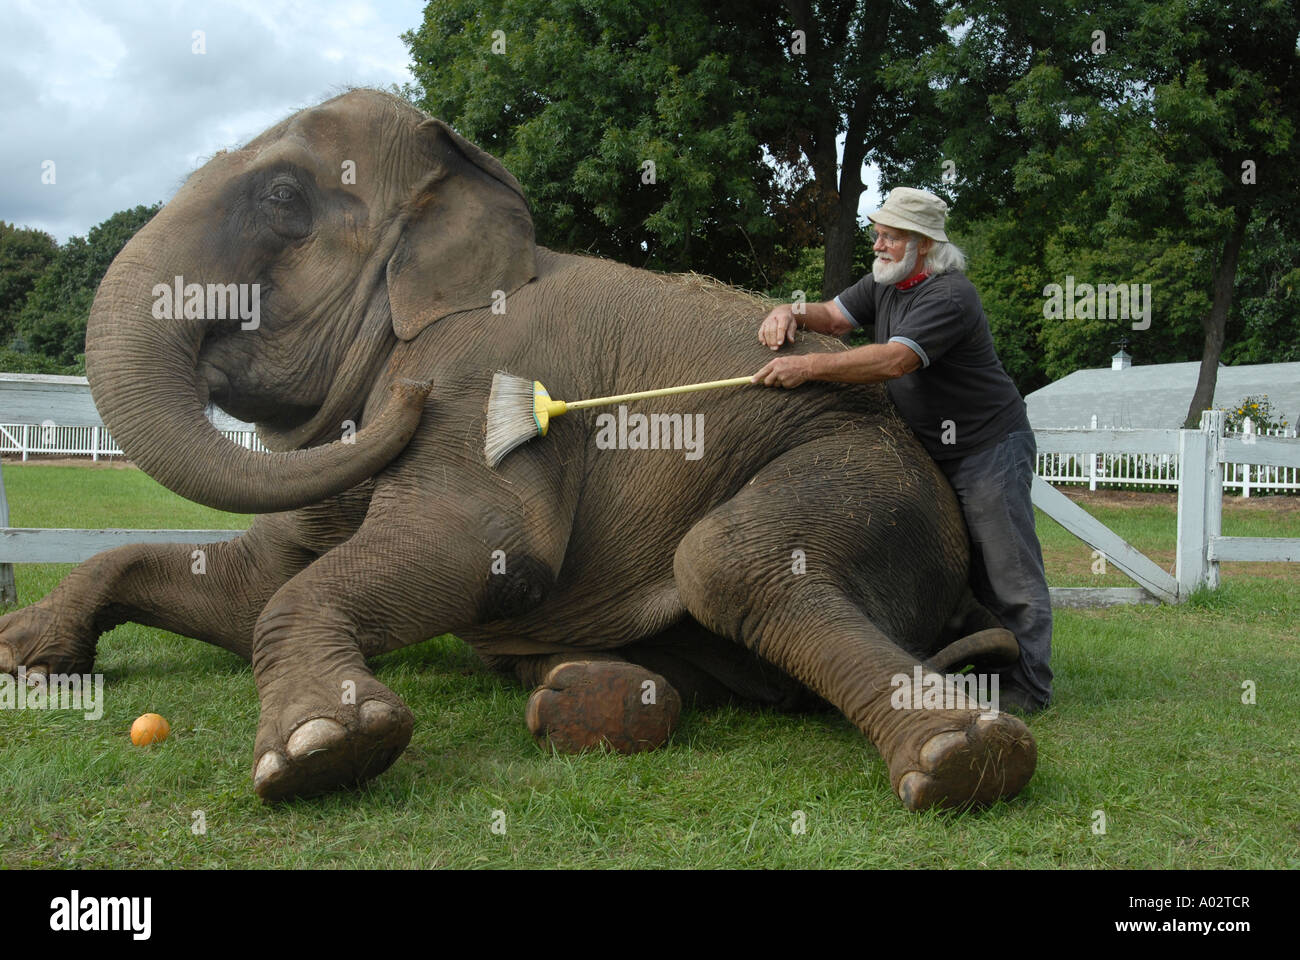 Animal trainer cleans his elephant at a county fair in Durham Connecticut USA Stock Photo